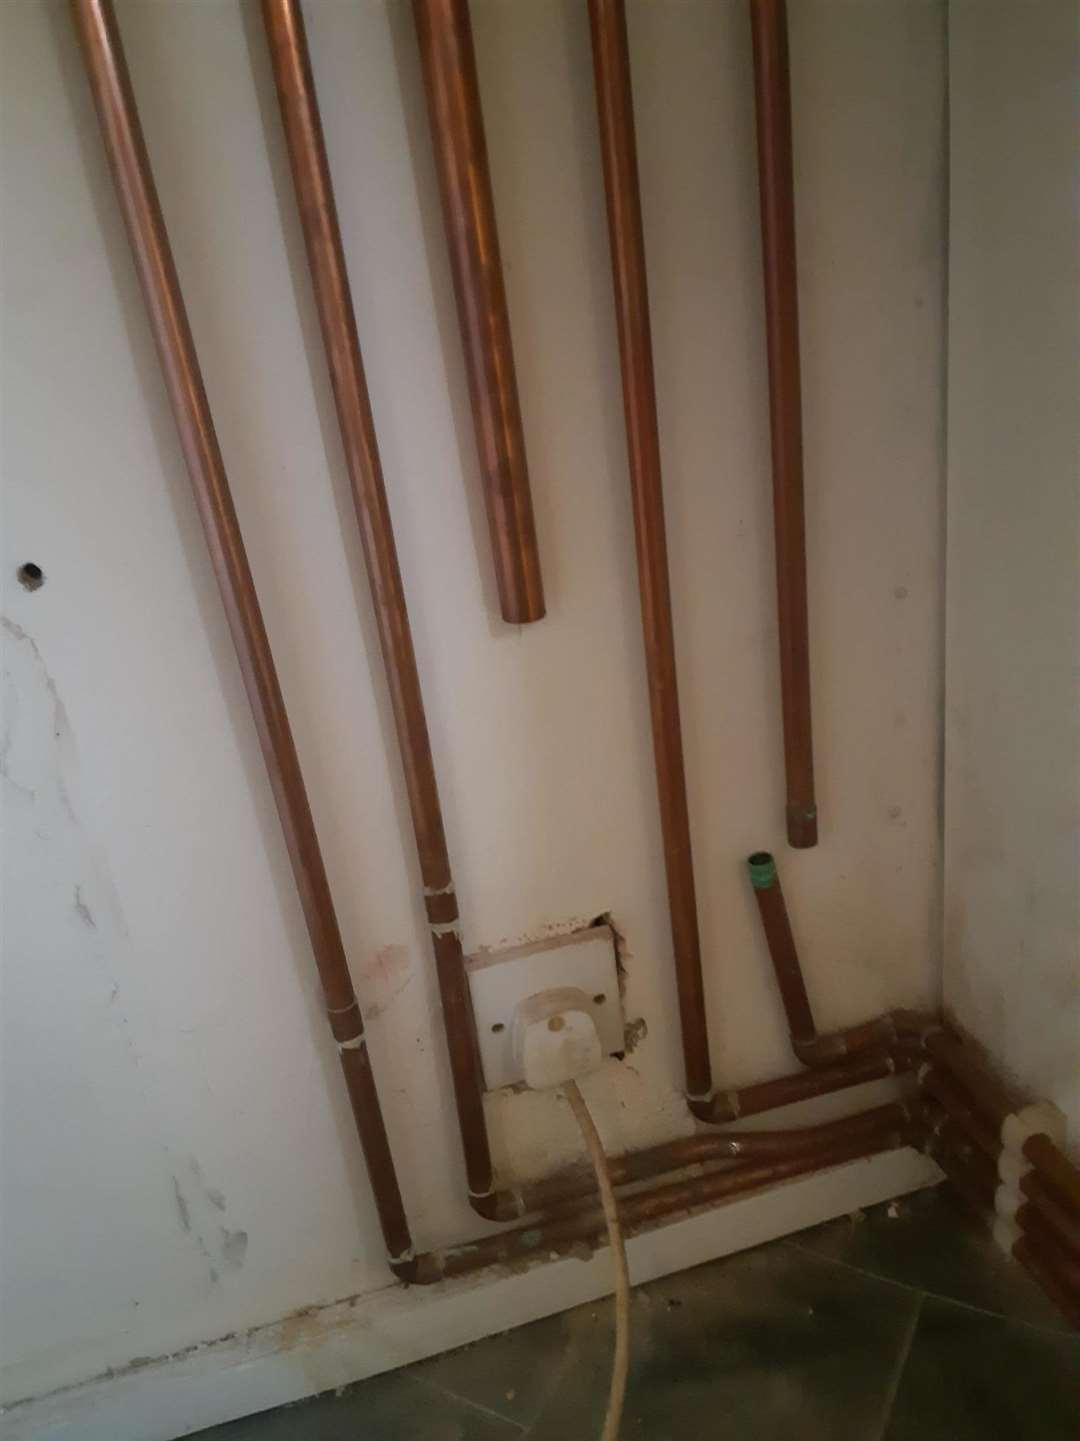 Unfinished pipe work in her flat